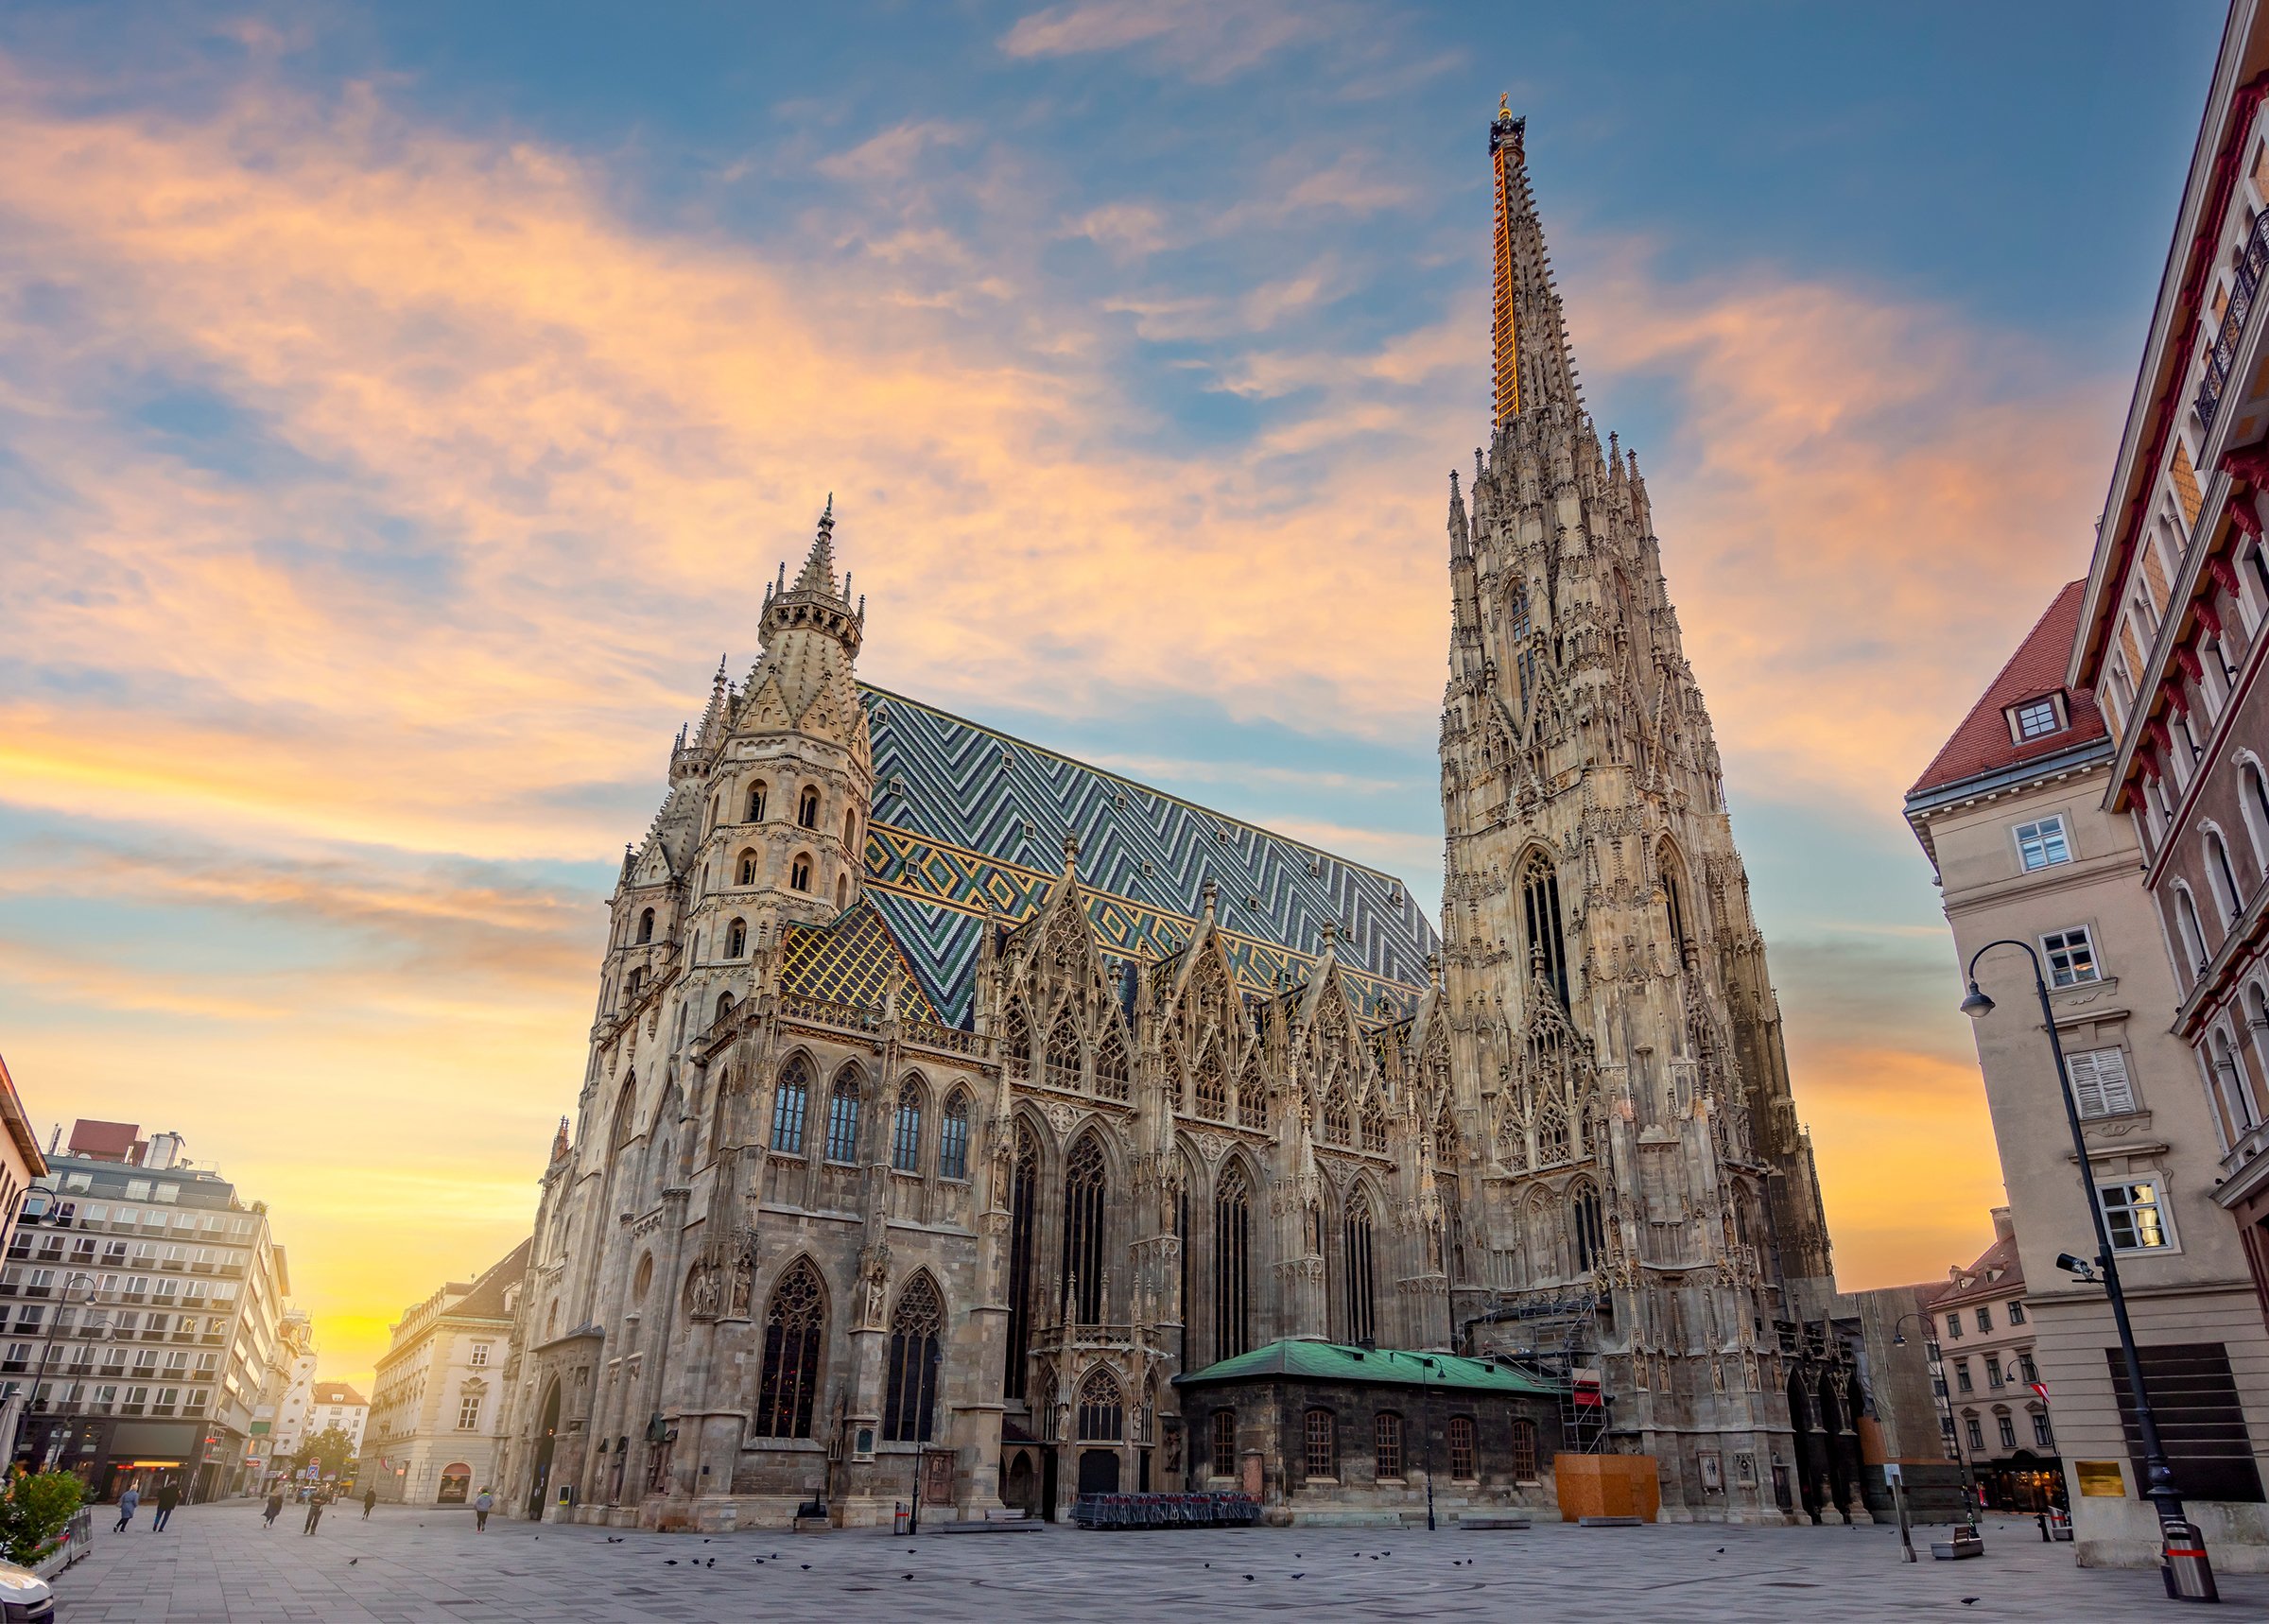 City break: discover Vienna & save money with H-Hotels.com